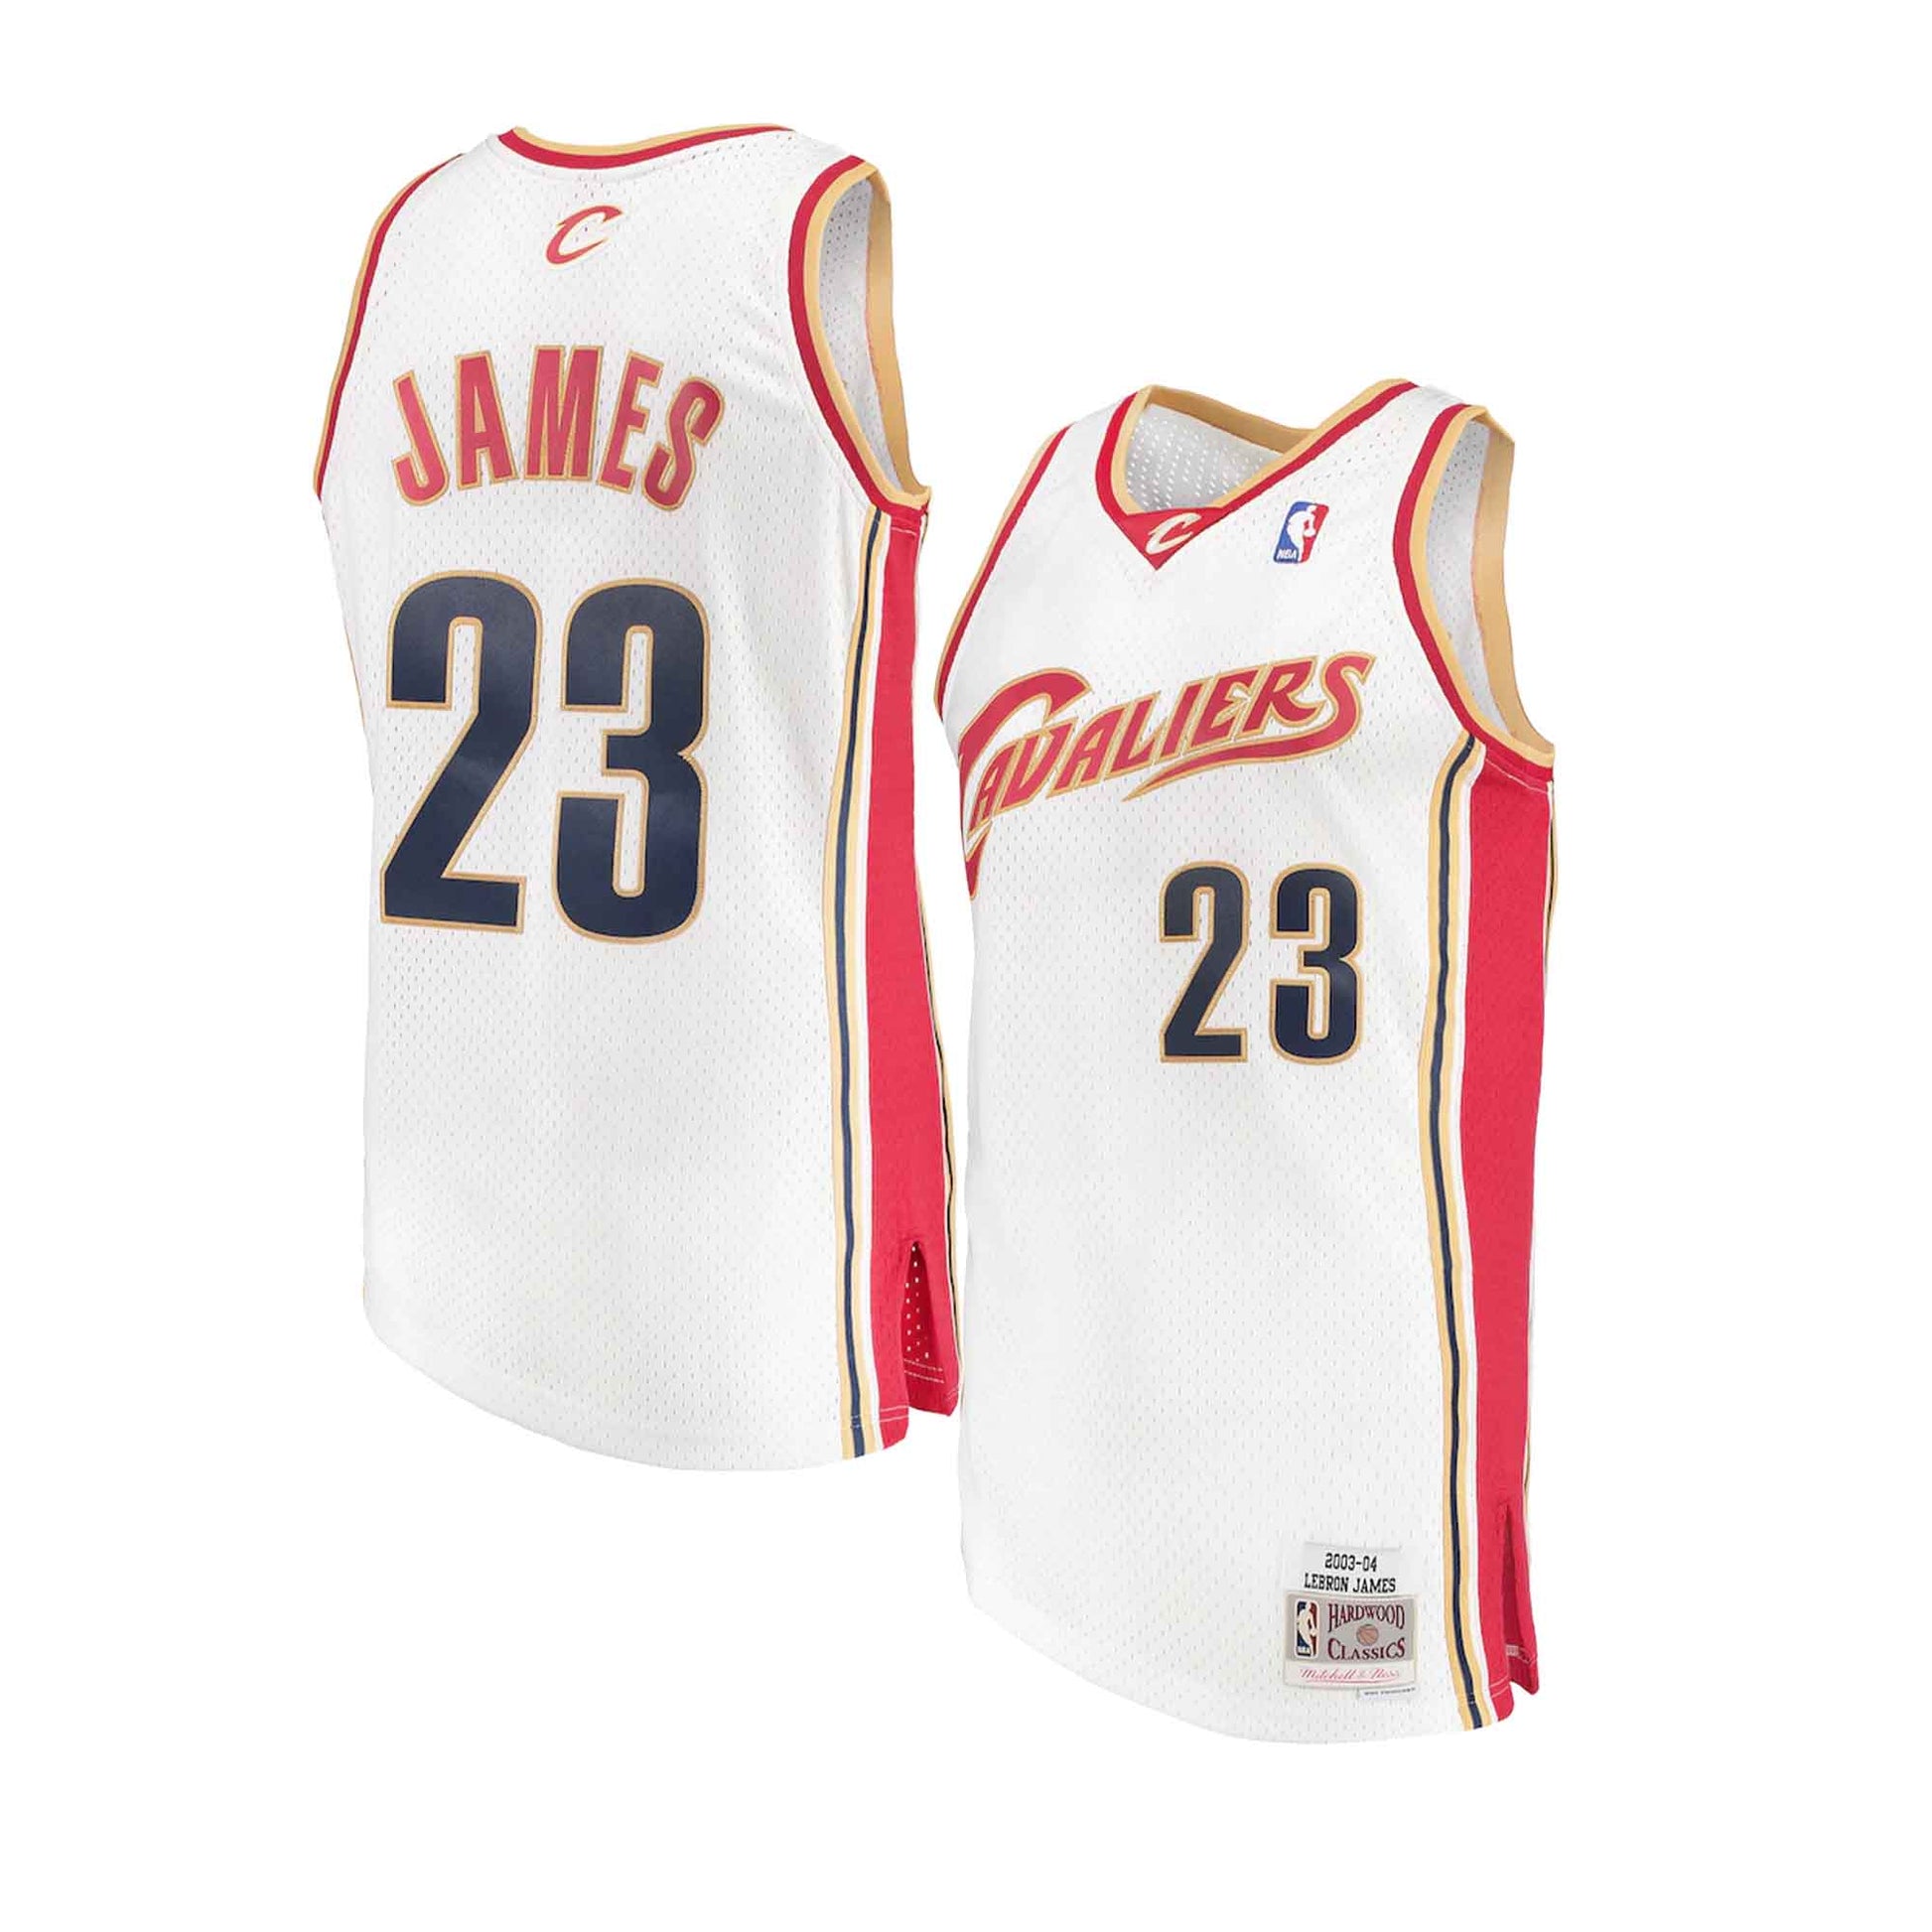 Cleveland Cavaliers #23 Lebron James Navy Blue Road Jersey